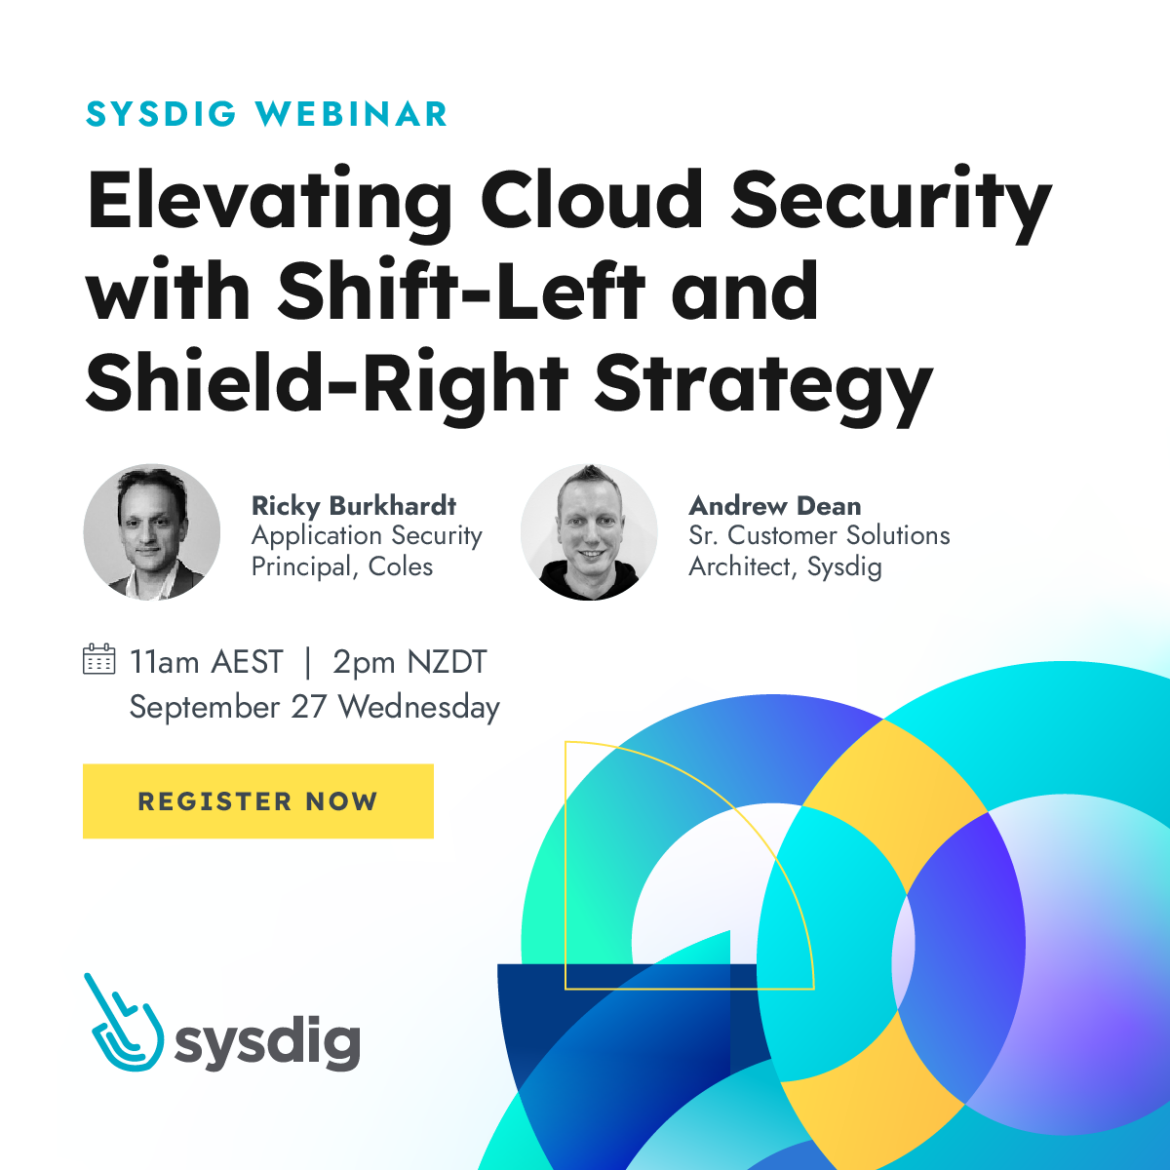 Elevating Cloud Security with a Shift-Left and Shield-Right Strategy